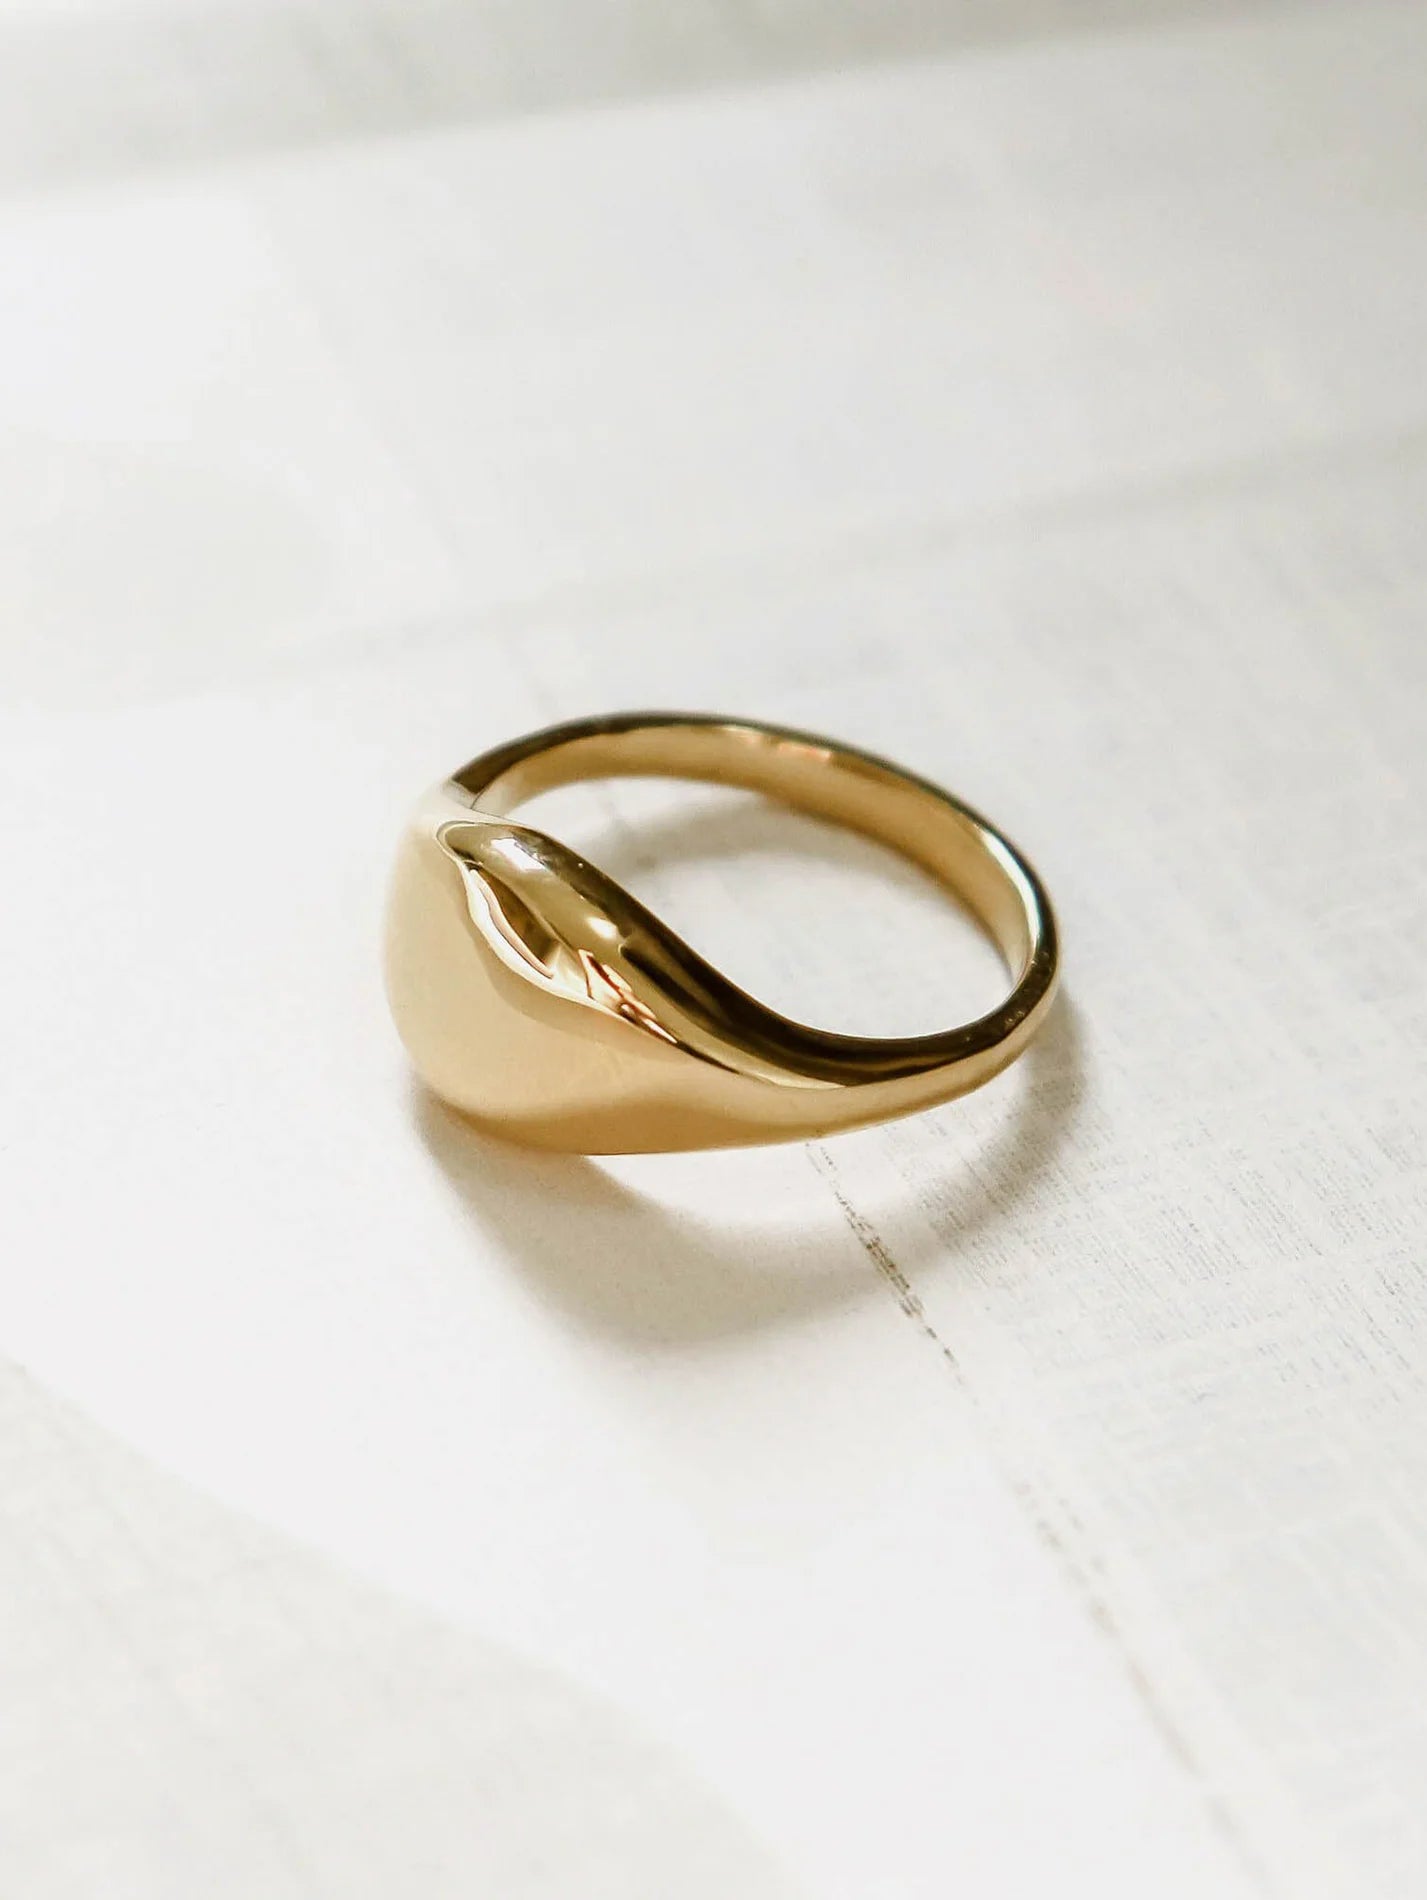 Helios Sun Ring. Solid gold. (Made-to-order)